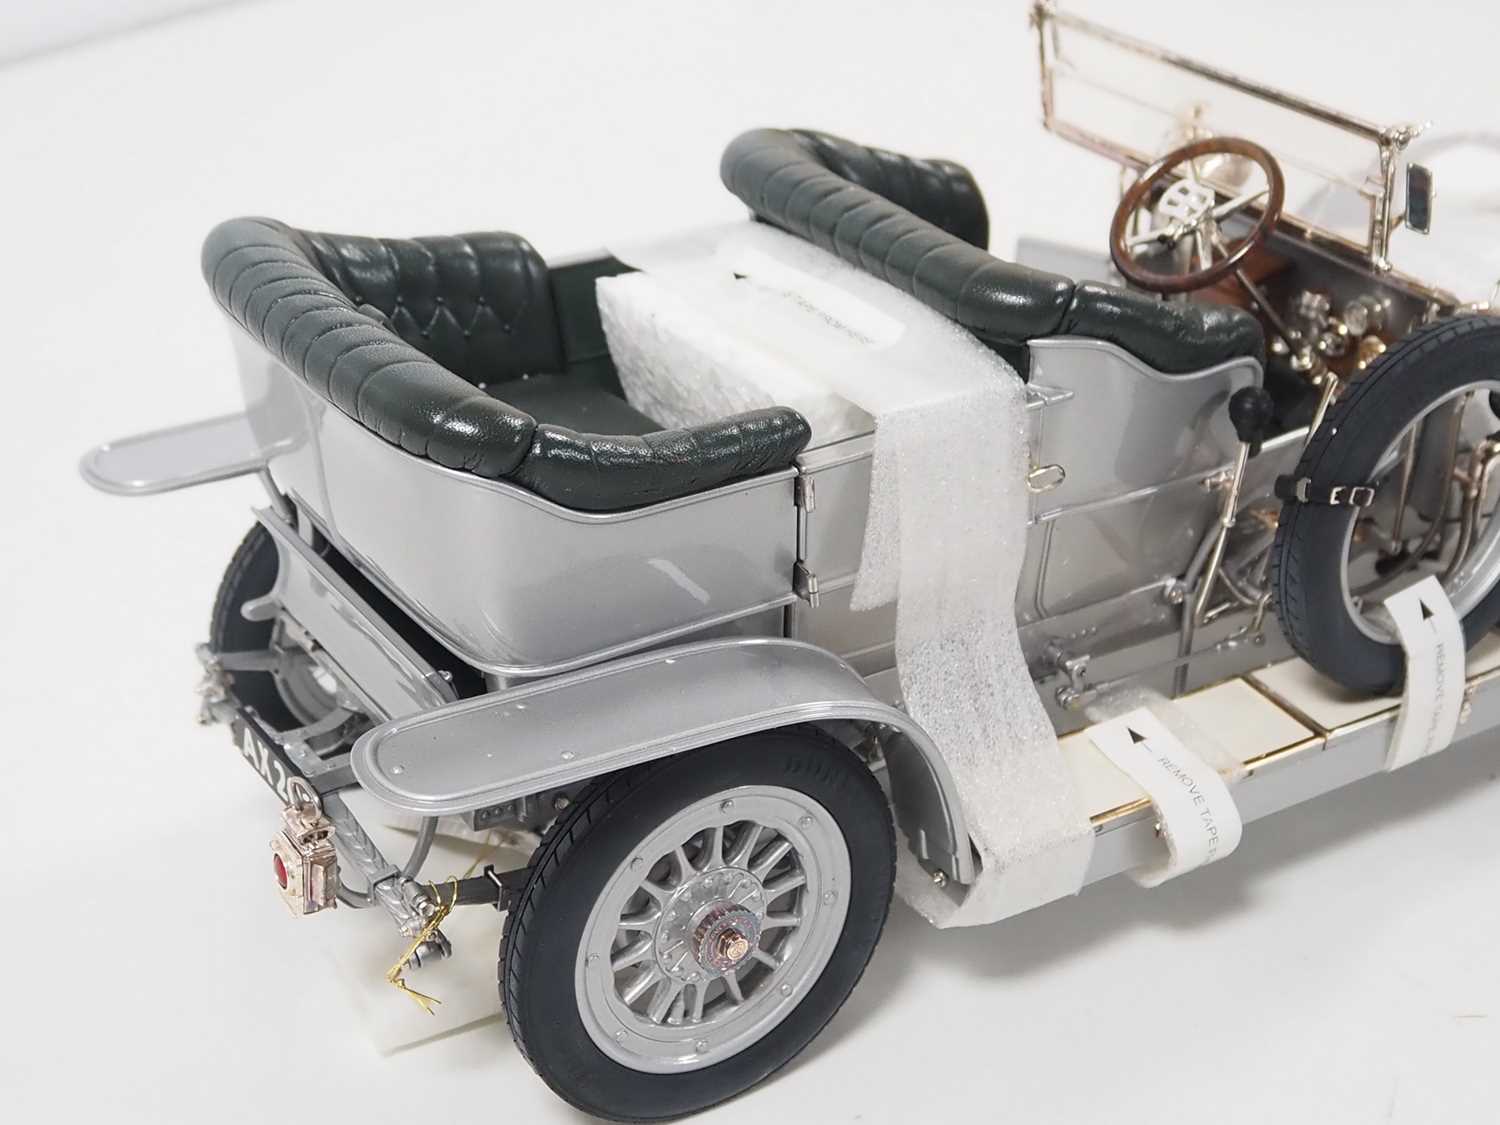 A FRANKLIN MINT 1:12 scale diecast 1907 Rolls Royce Silver Ghost - appears undisplayed in original - Image 5 of 8